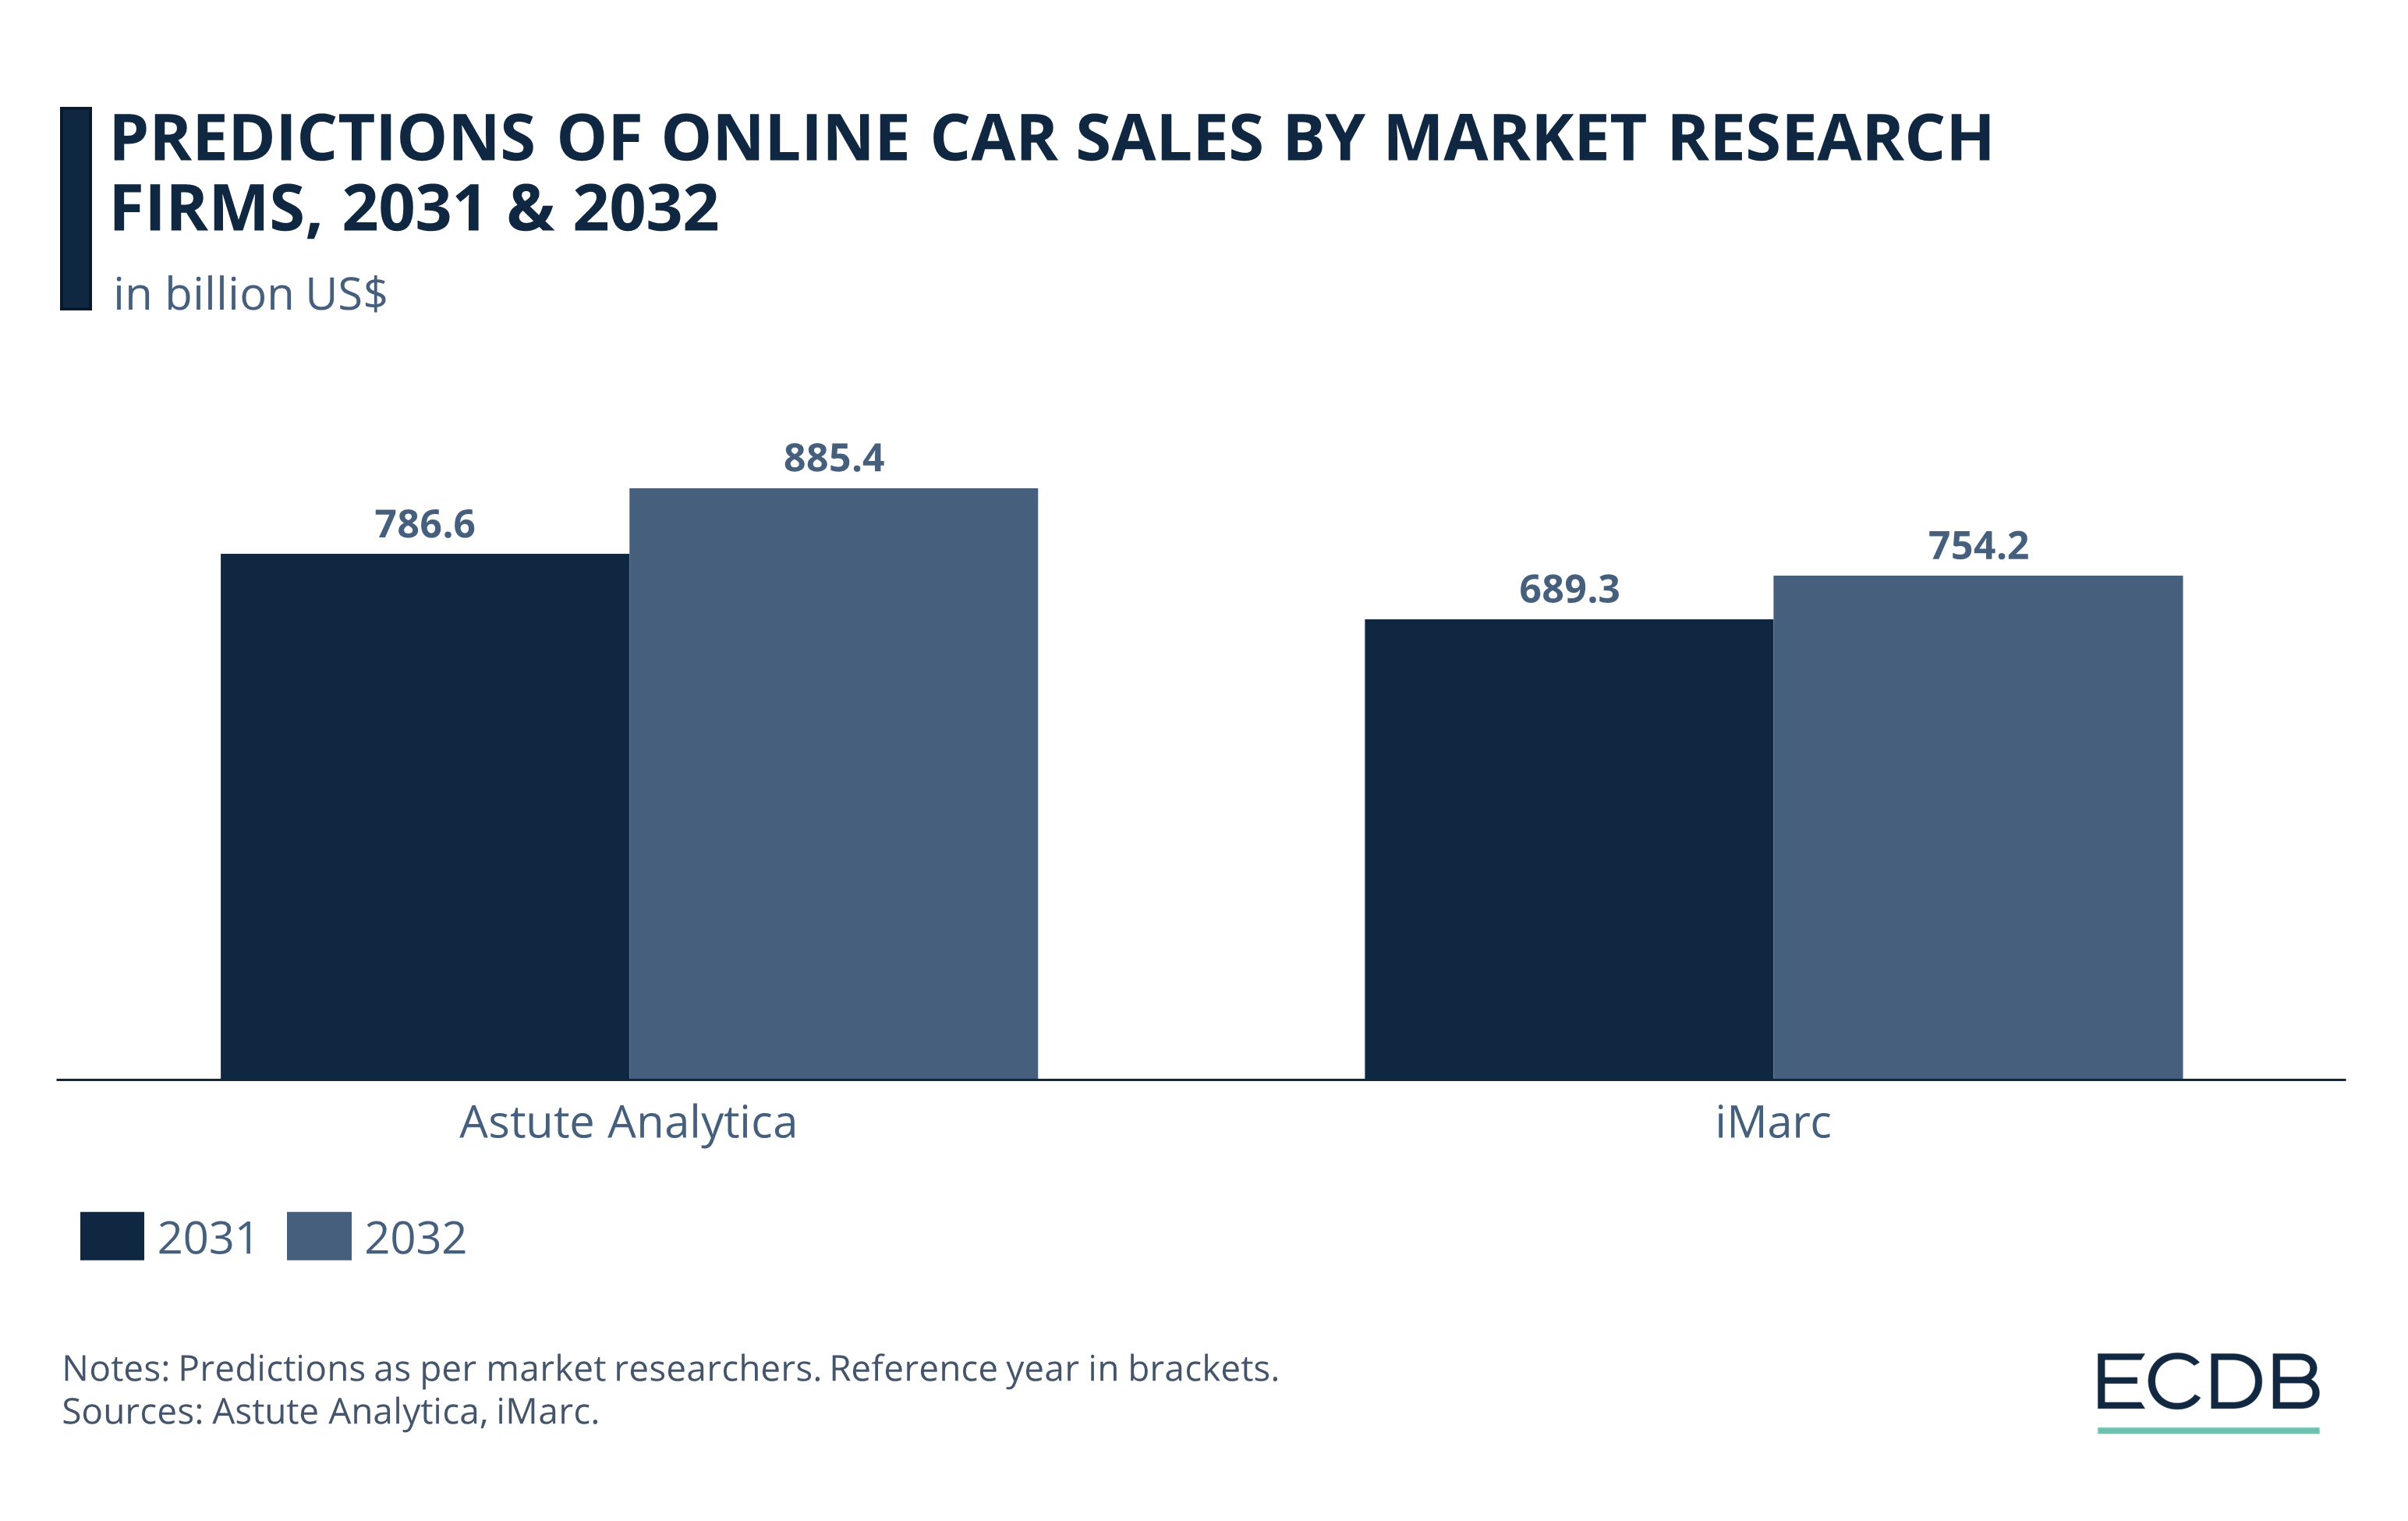 Predicted Online Car Sales for 2028 and 2030, According to Market Research Firms